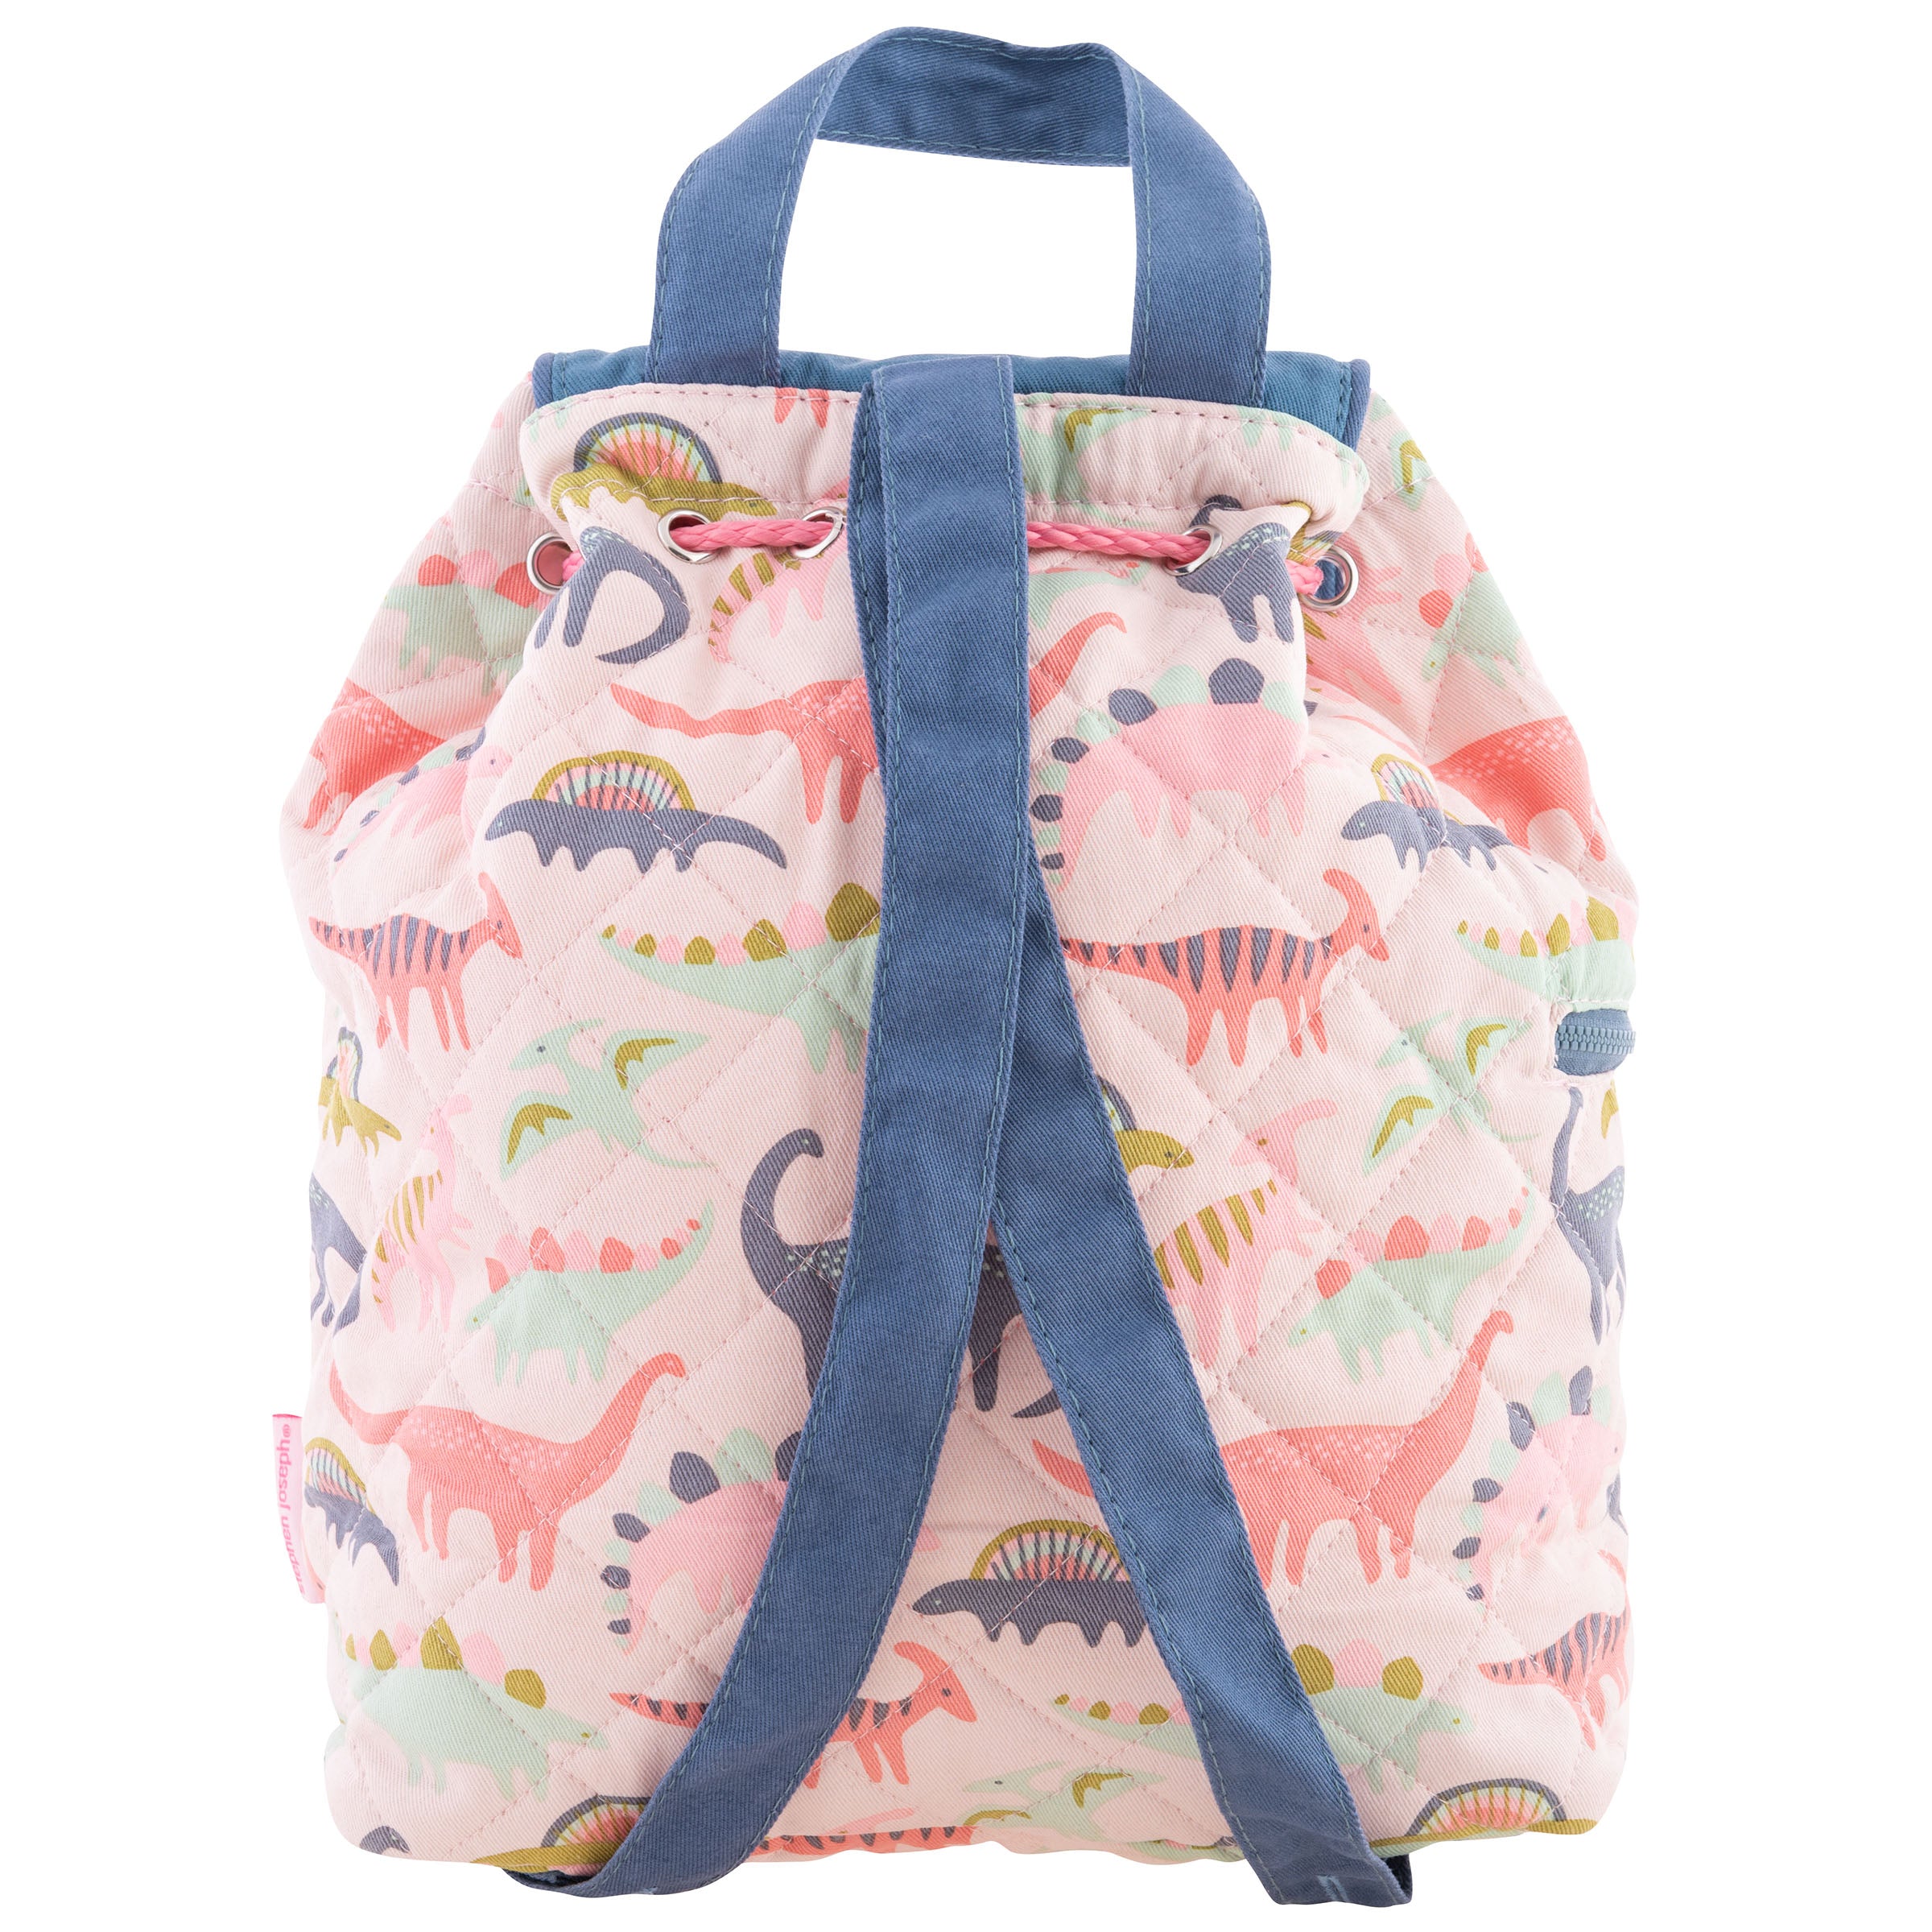 Quilted Backpack For Baby – Stephen Joseph Gifts